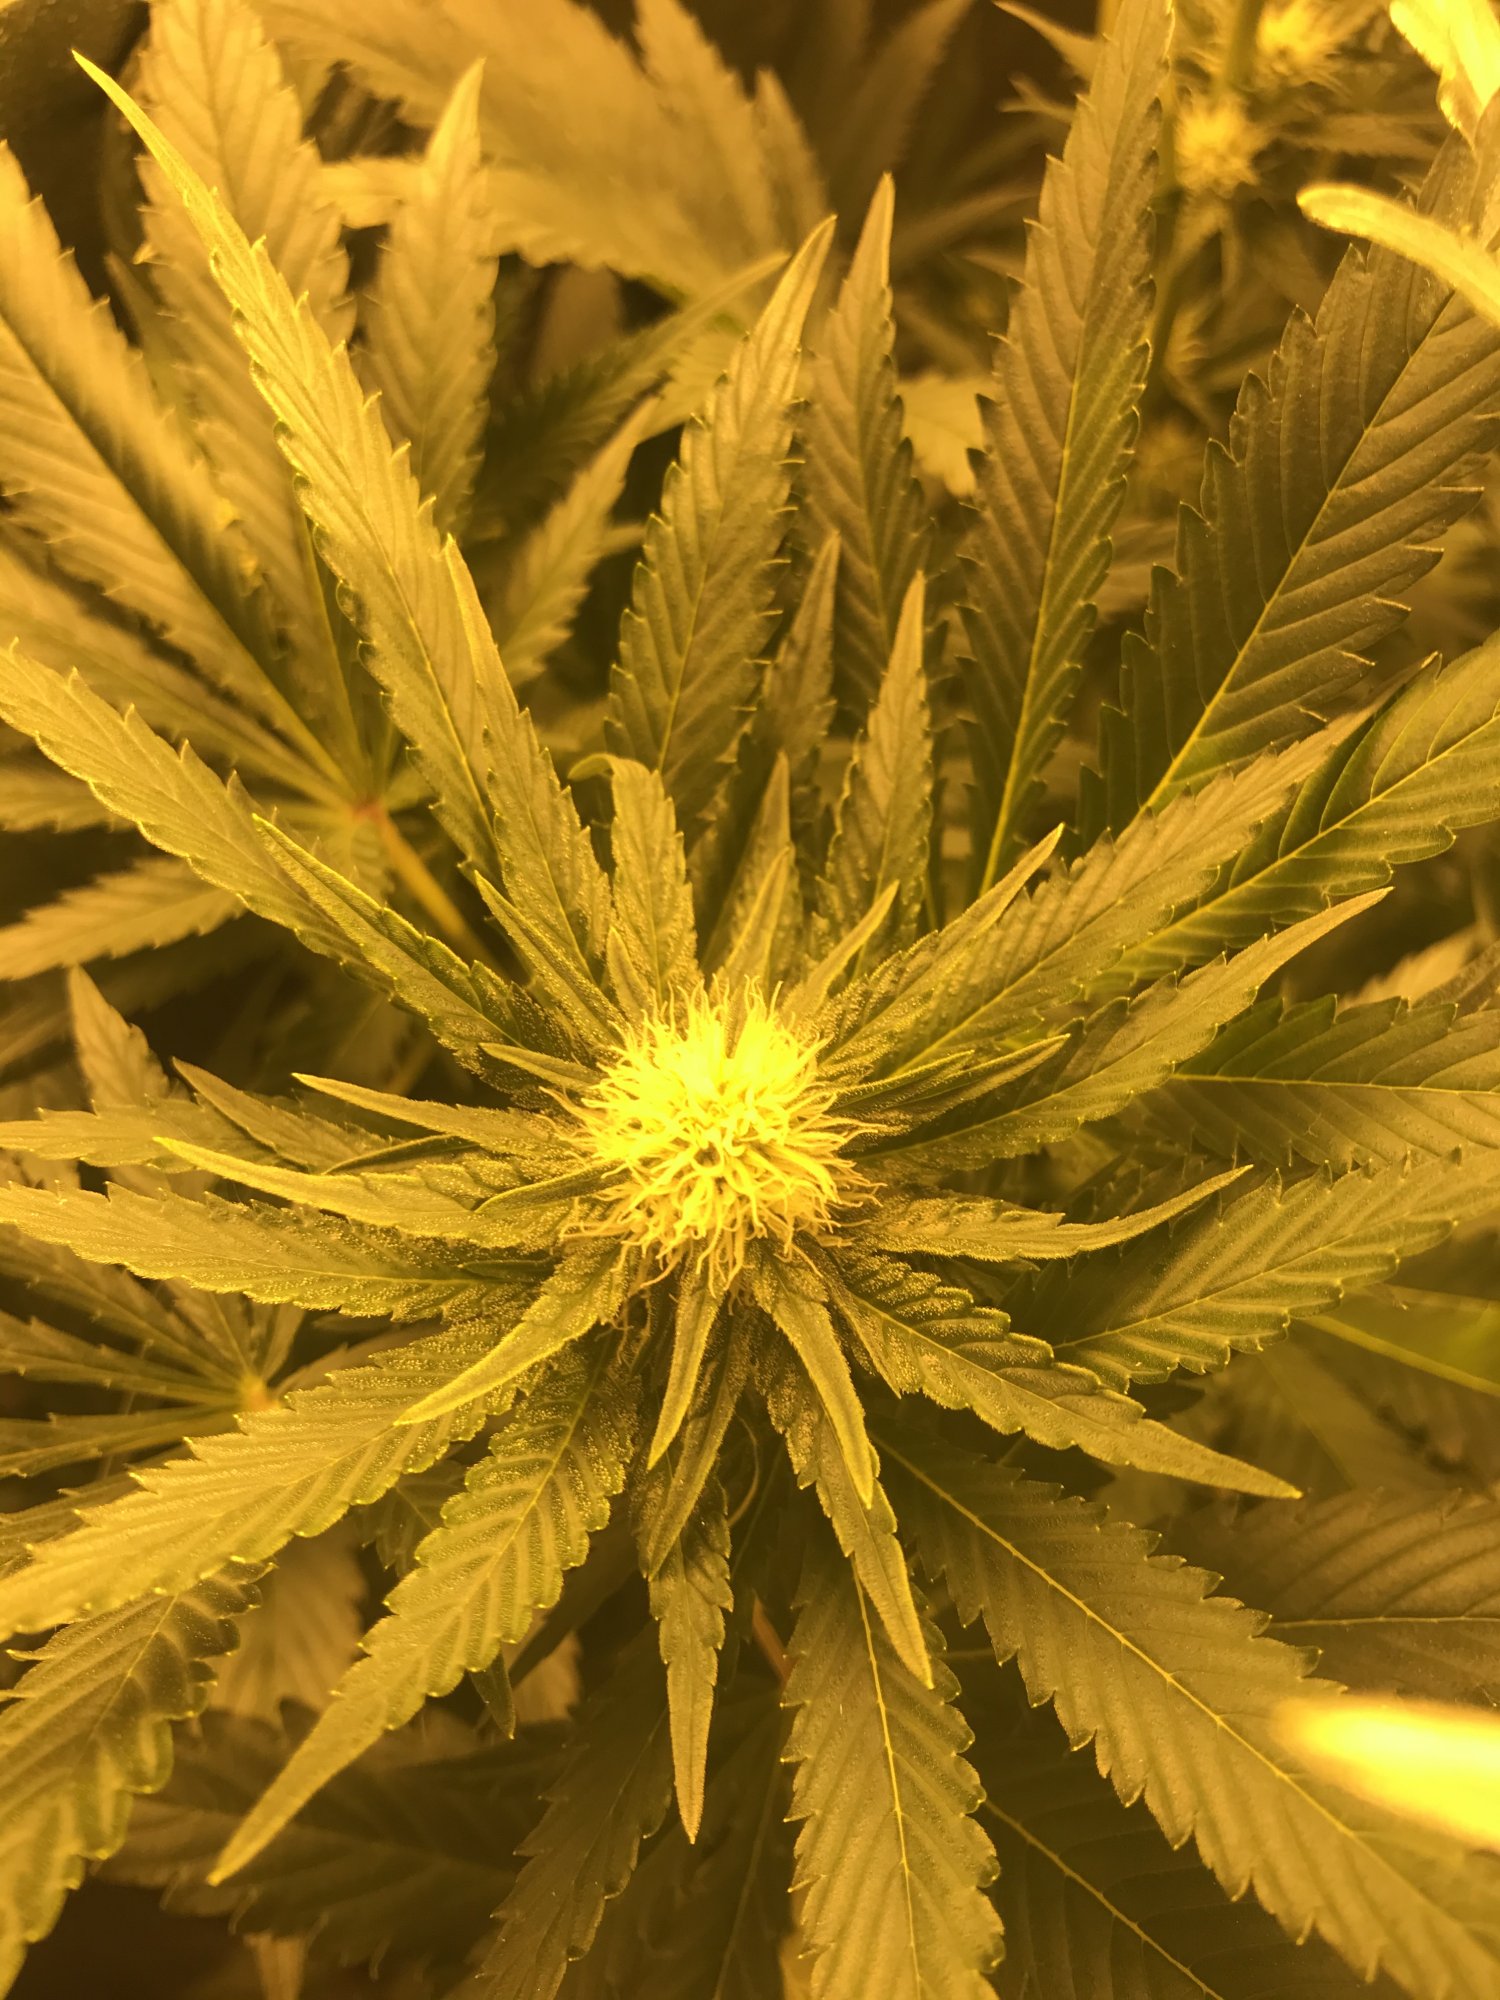 Please have a look at my plants 3 weeks into flower today 5